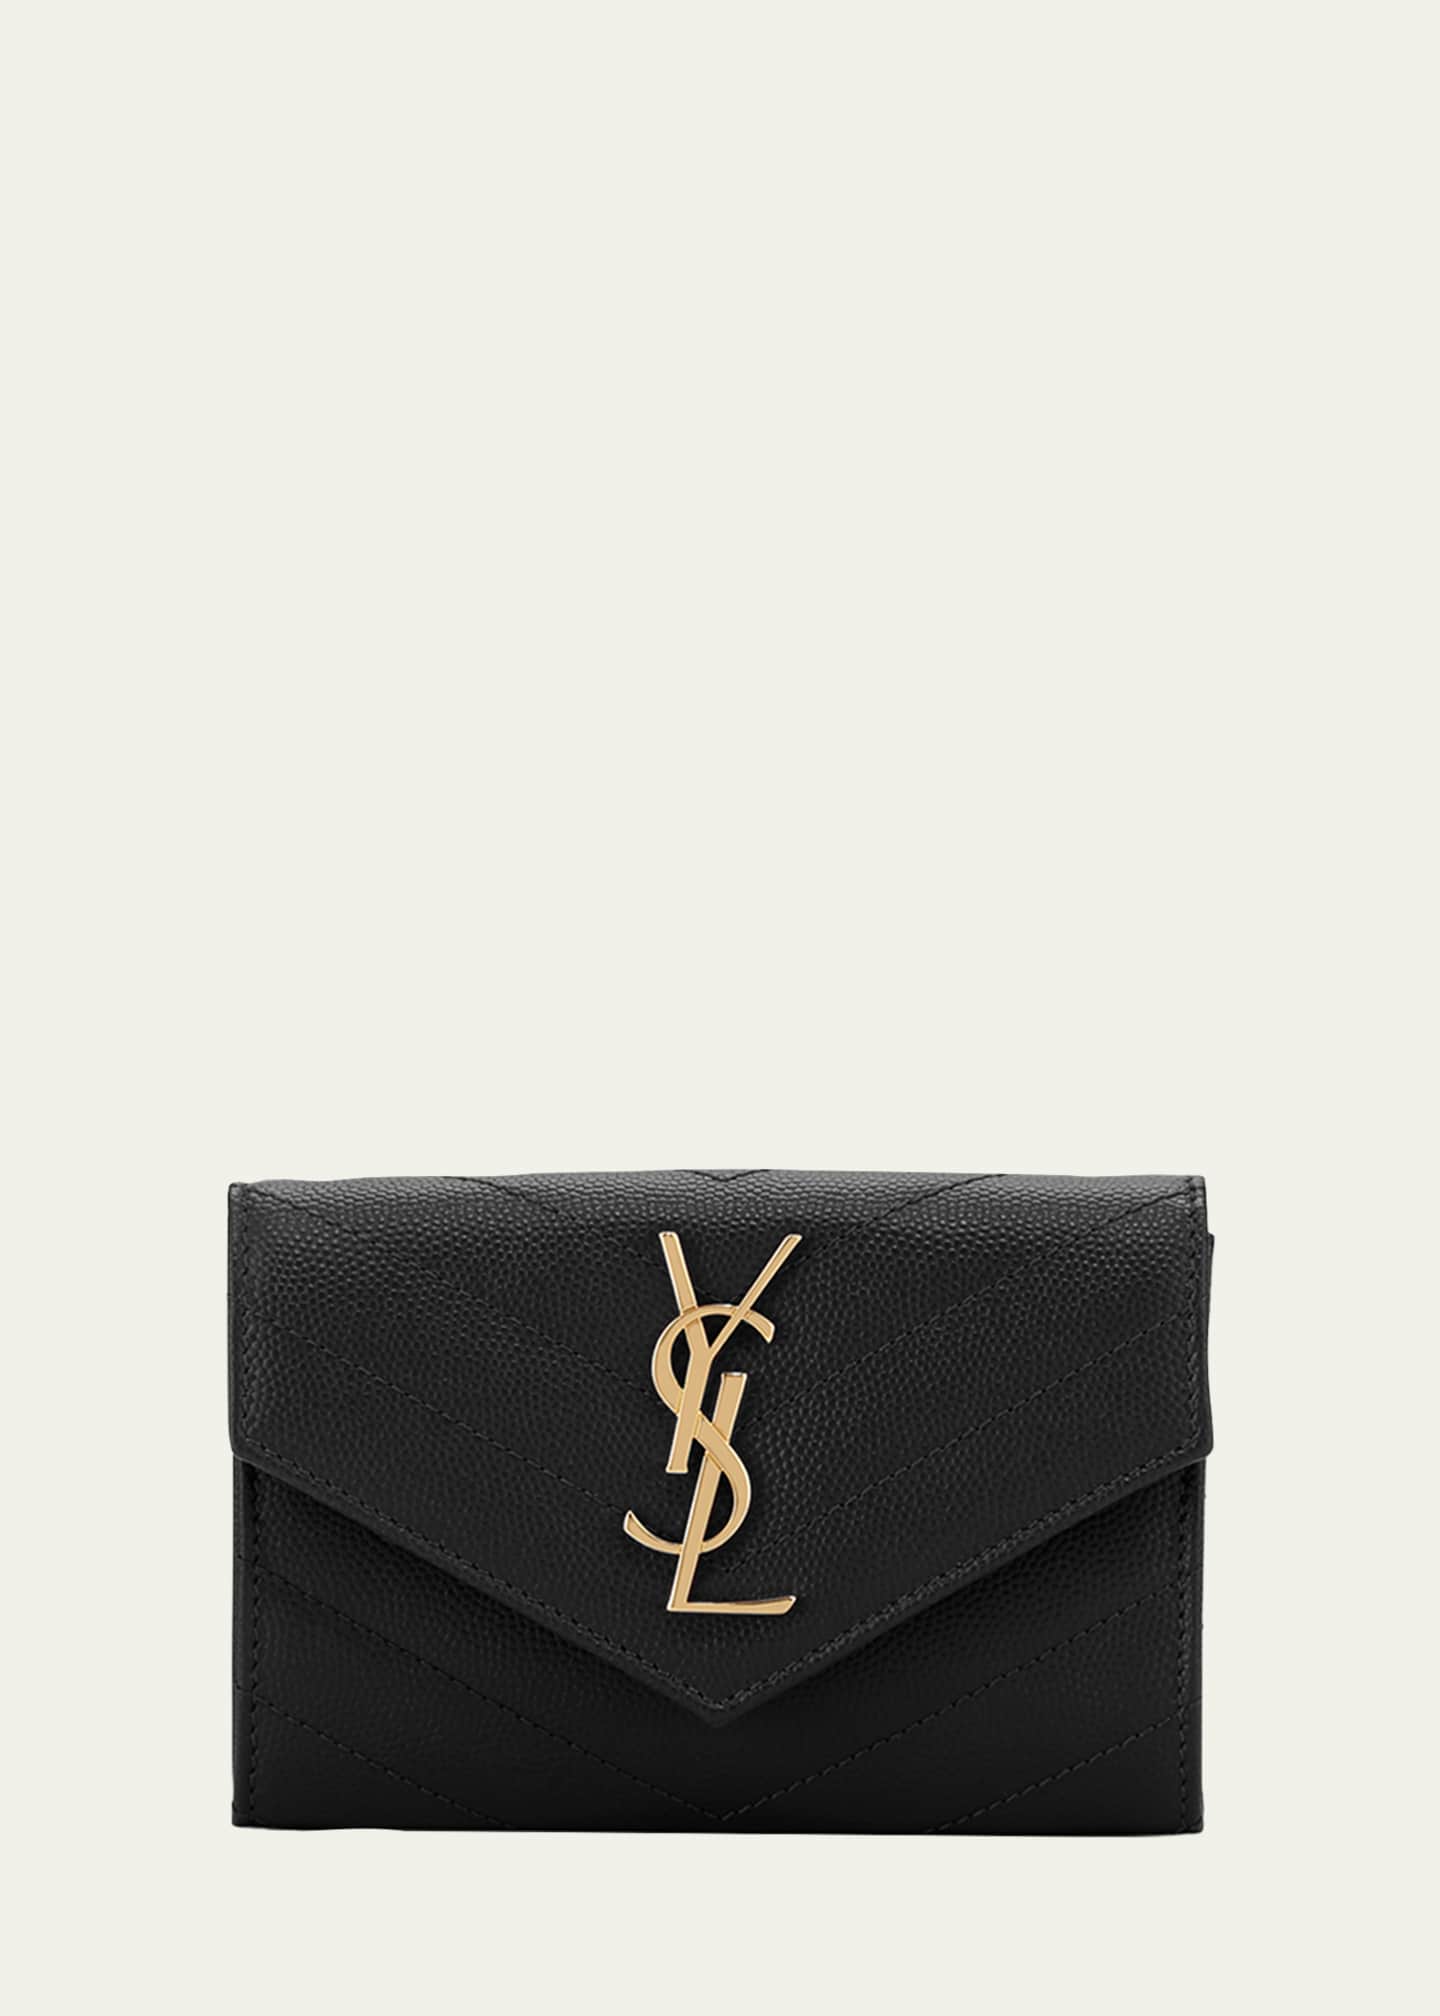 small ysl wallet